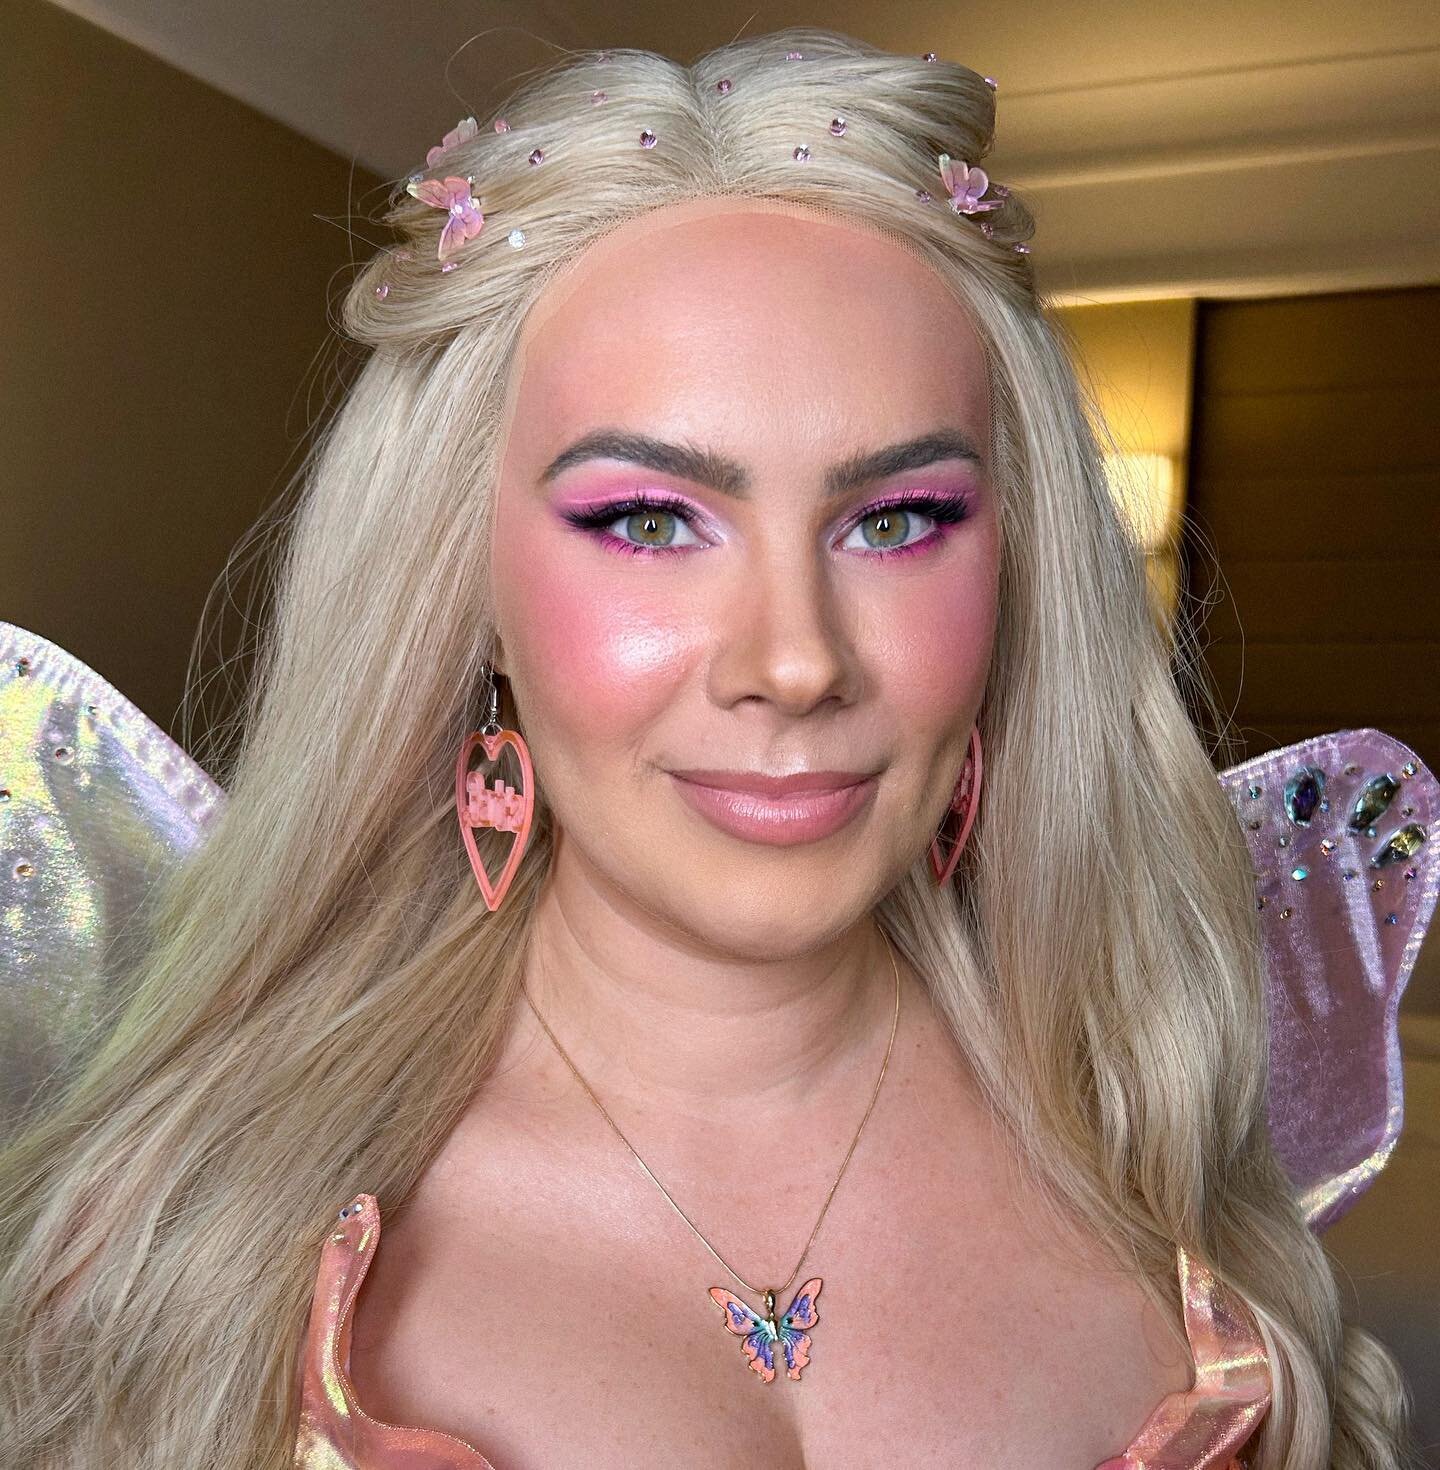 Oh look guys it&rsquo;s Fairytopia Barbie! Oh wait, it&rsquo;s just the incredible @victoria_devine 😉🧚🏻&zwj;♀️

Anyone who knows me loves I FROTH a theme so when I meet a kindred spirit that matches that wavelength you know it&rsquo;s on, especial